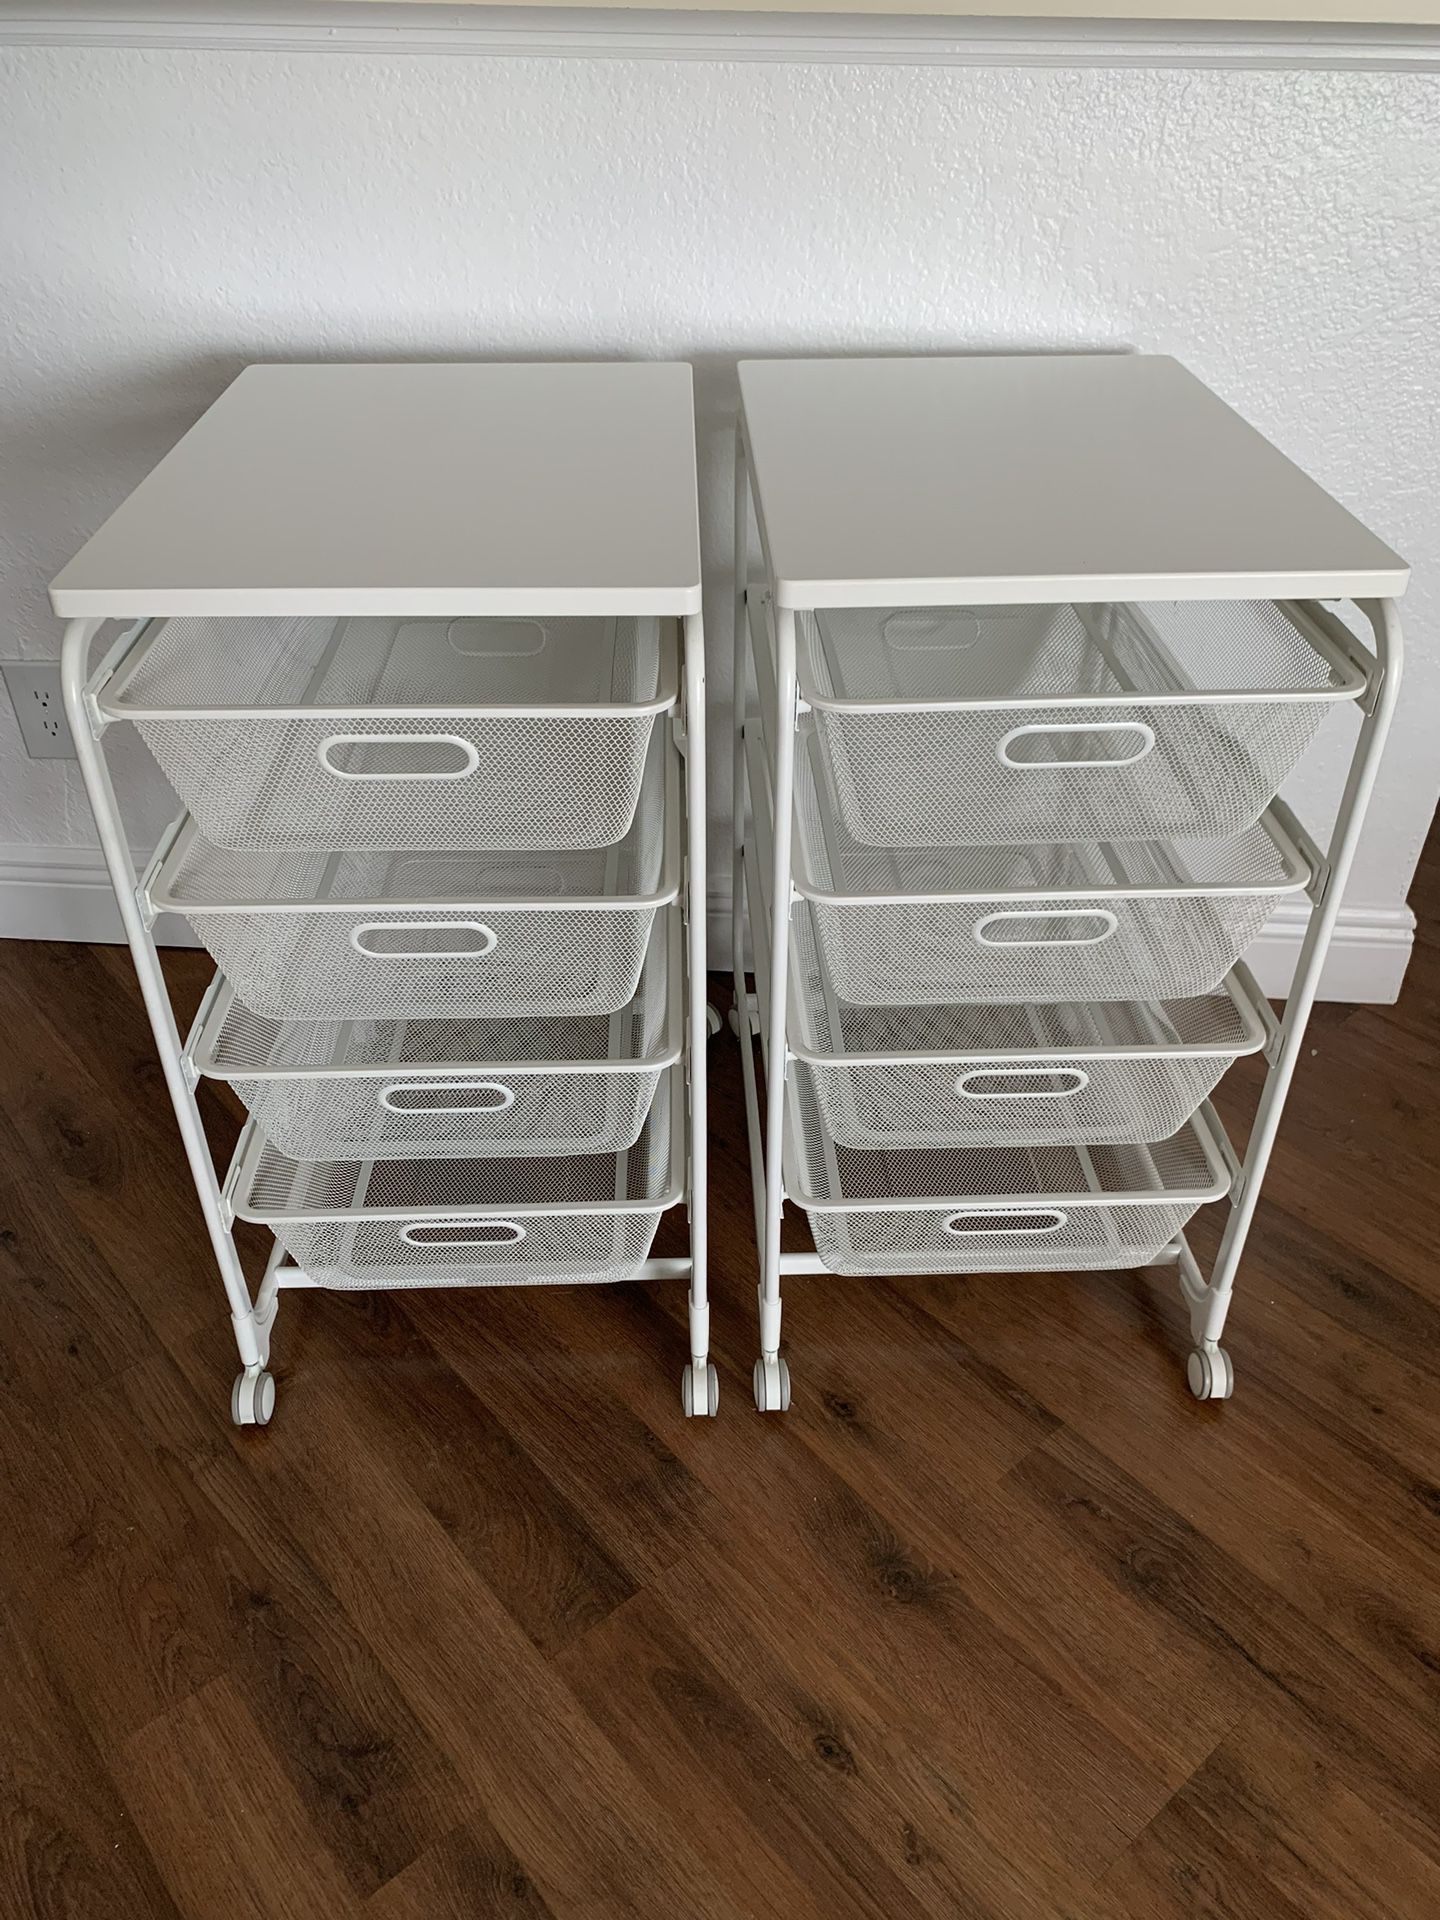 2-(two) Ikea ALGOT mesh drawers unit - metal frame and 4 metal basket with a bench top and wheels .